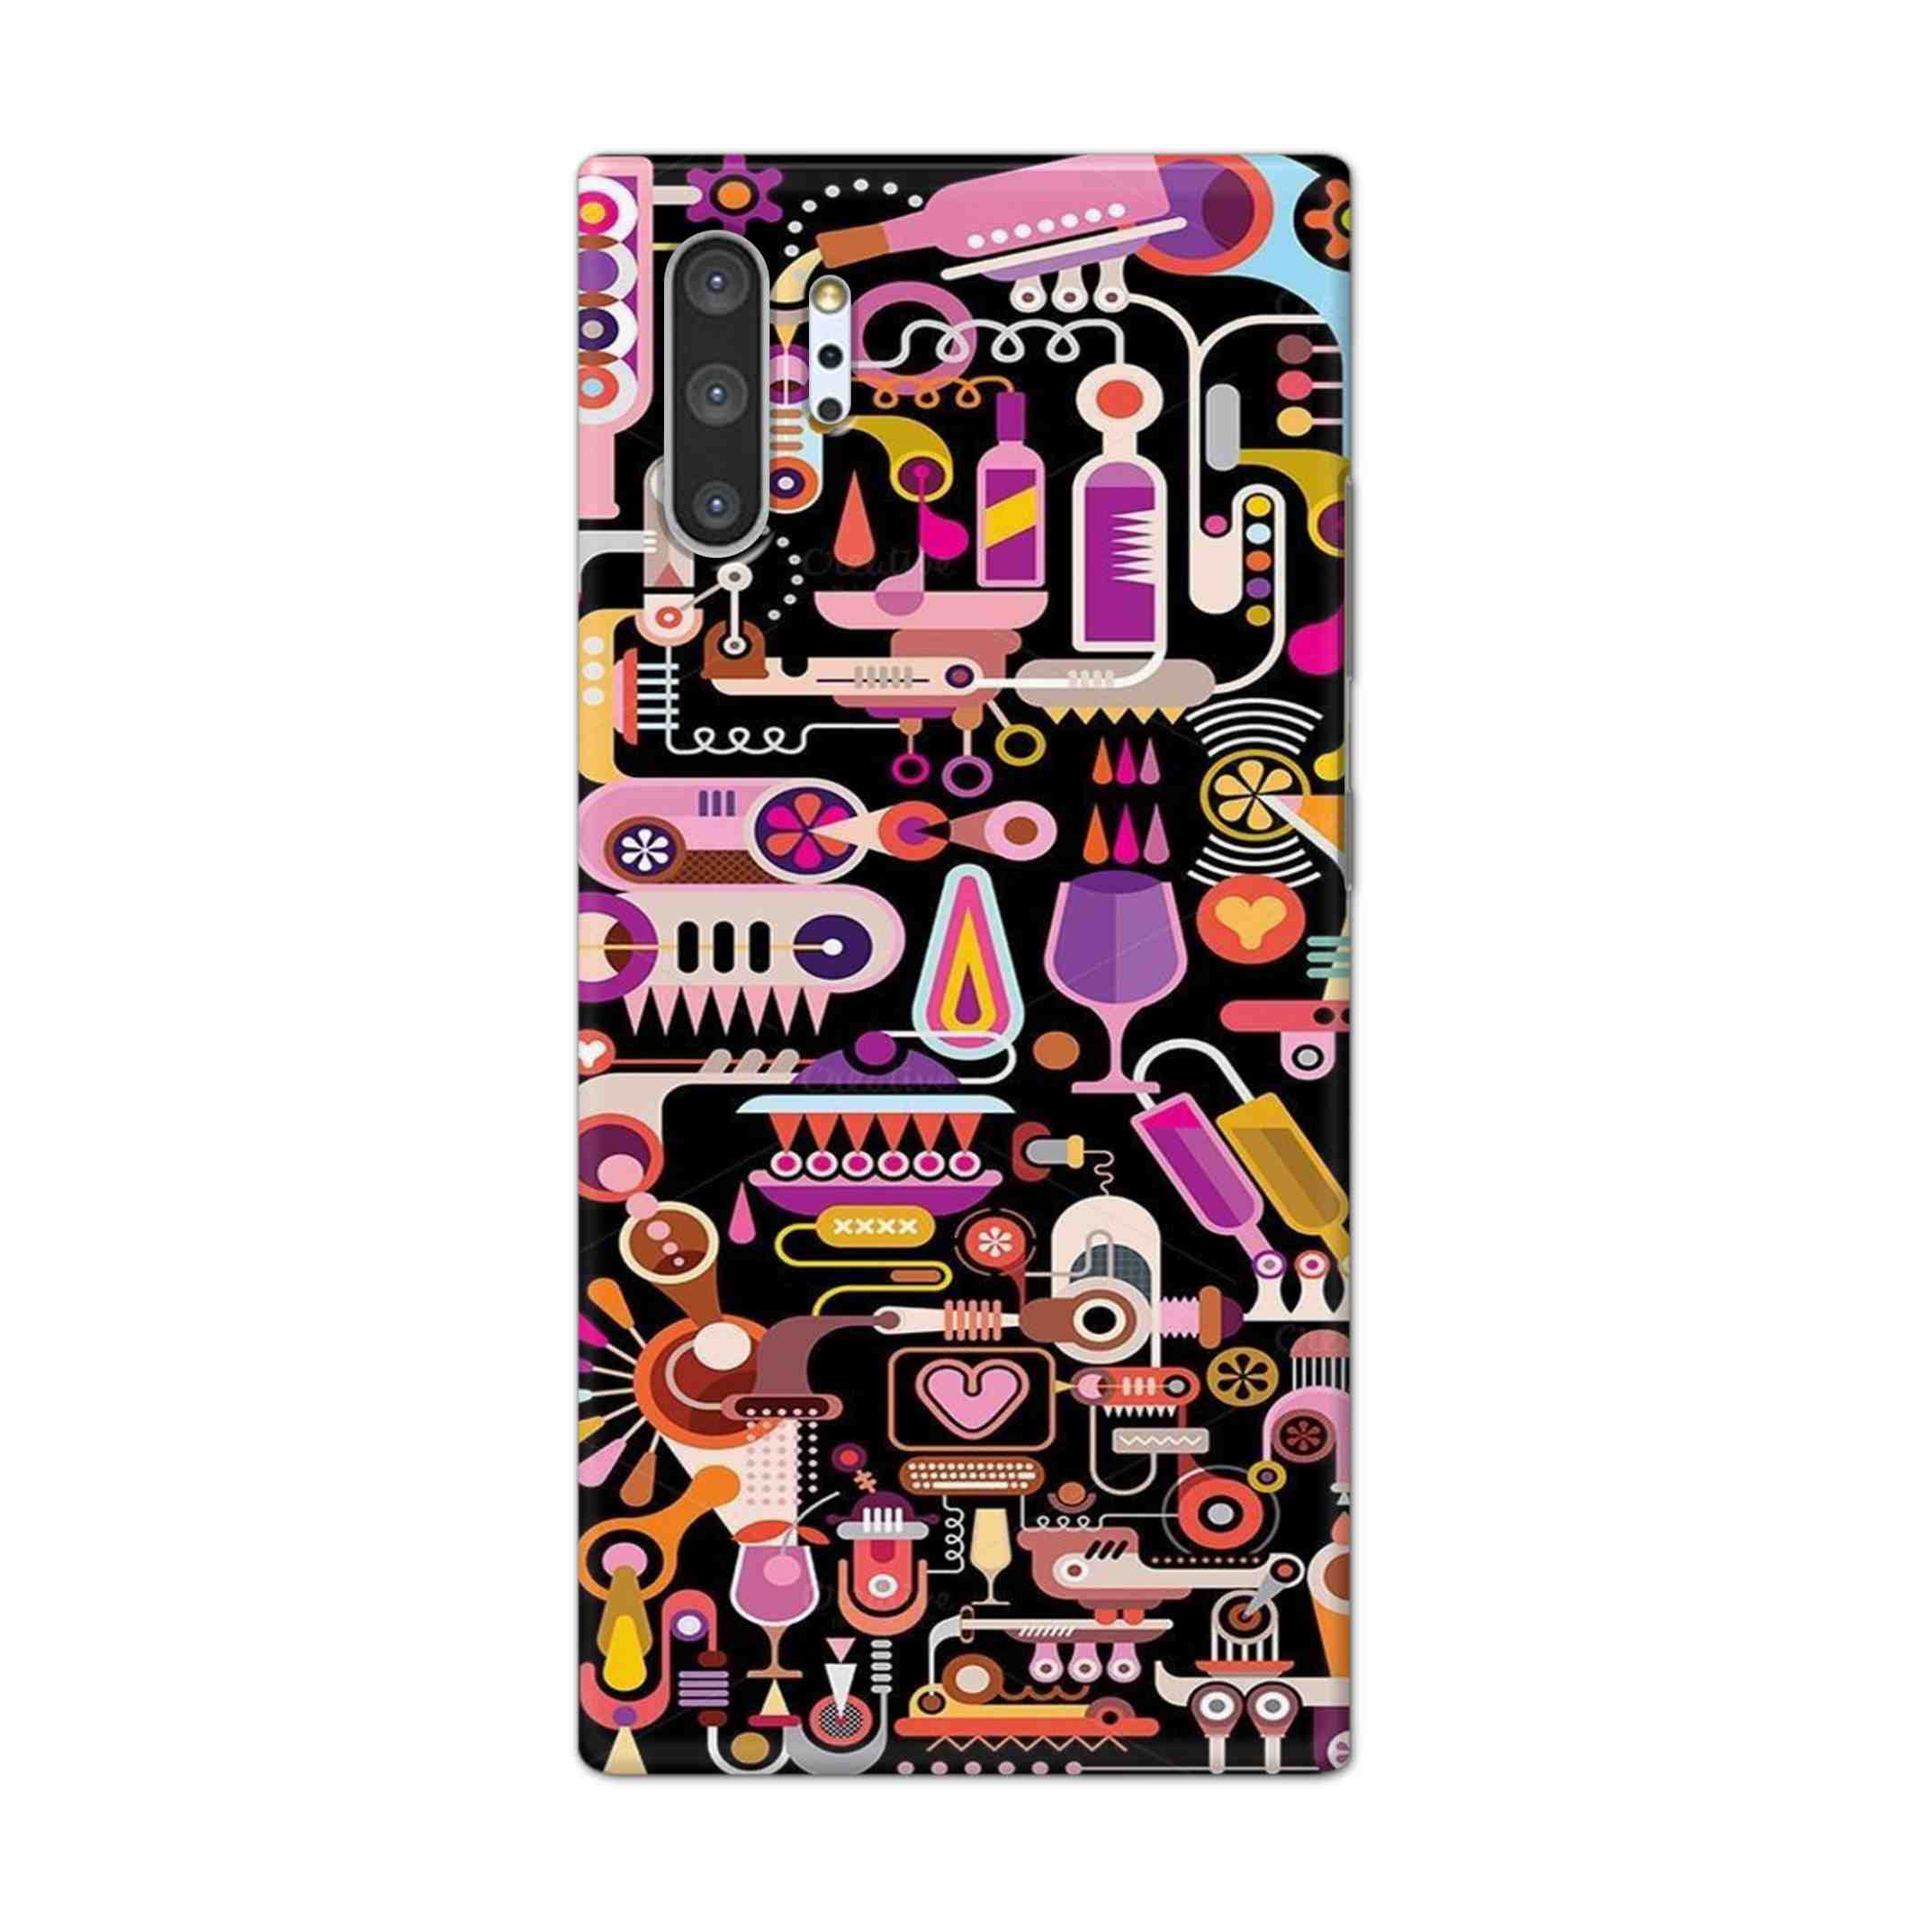 Buy Lab Art Hard Back Mobile Phone Case Cover For Samsung Galaxy Note 10 Pro Online